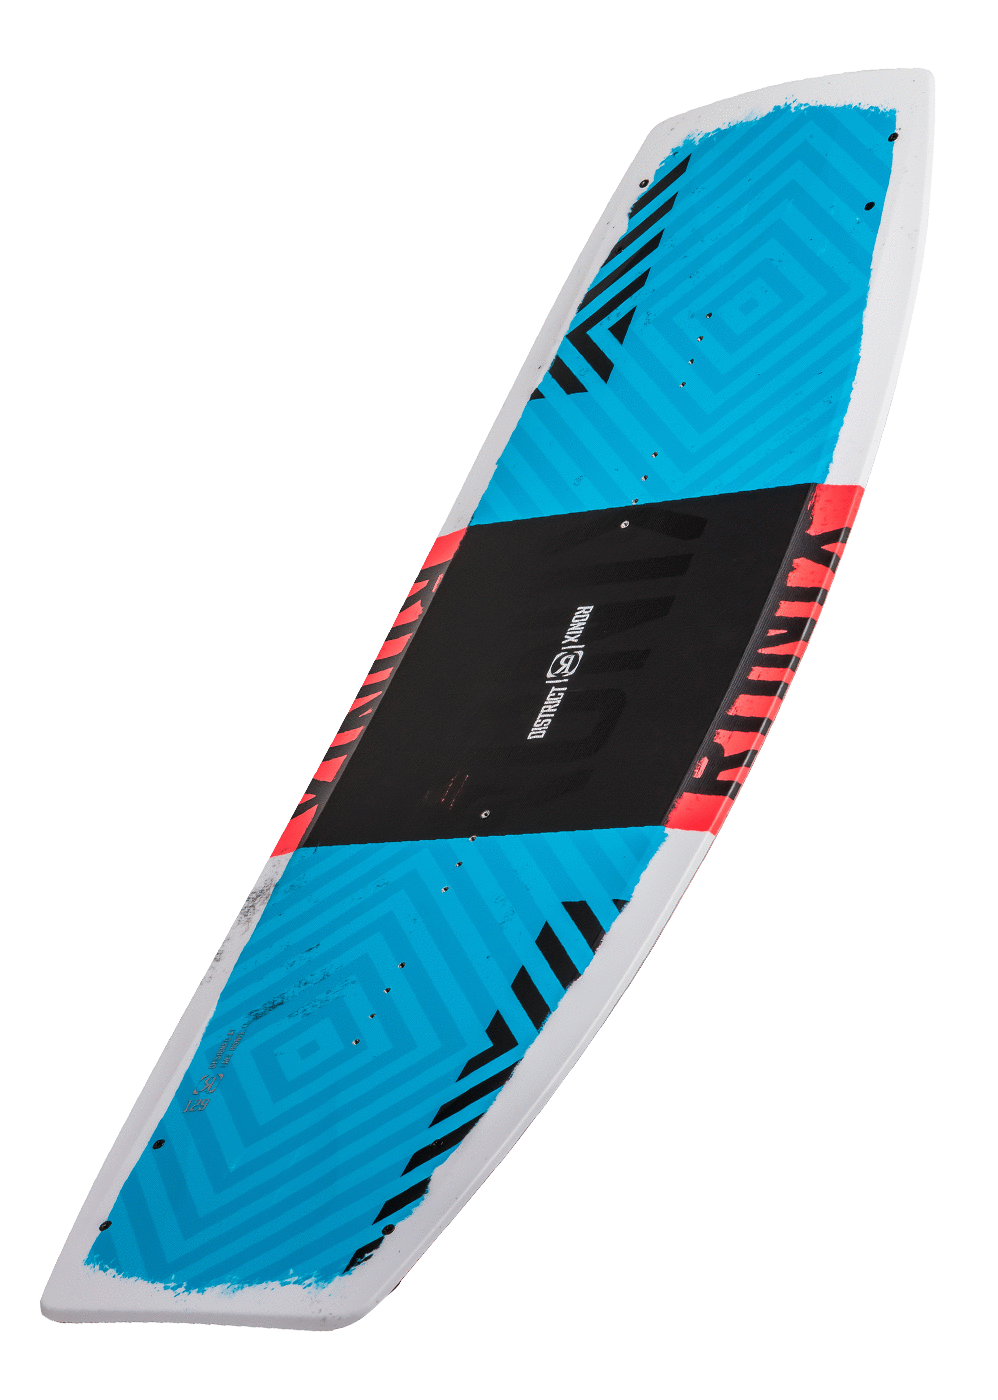 2024 RONIX DISTRICT 129 | BOY'S WAKEBOARD